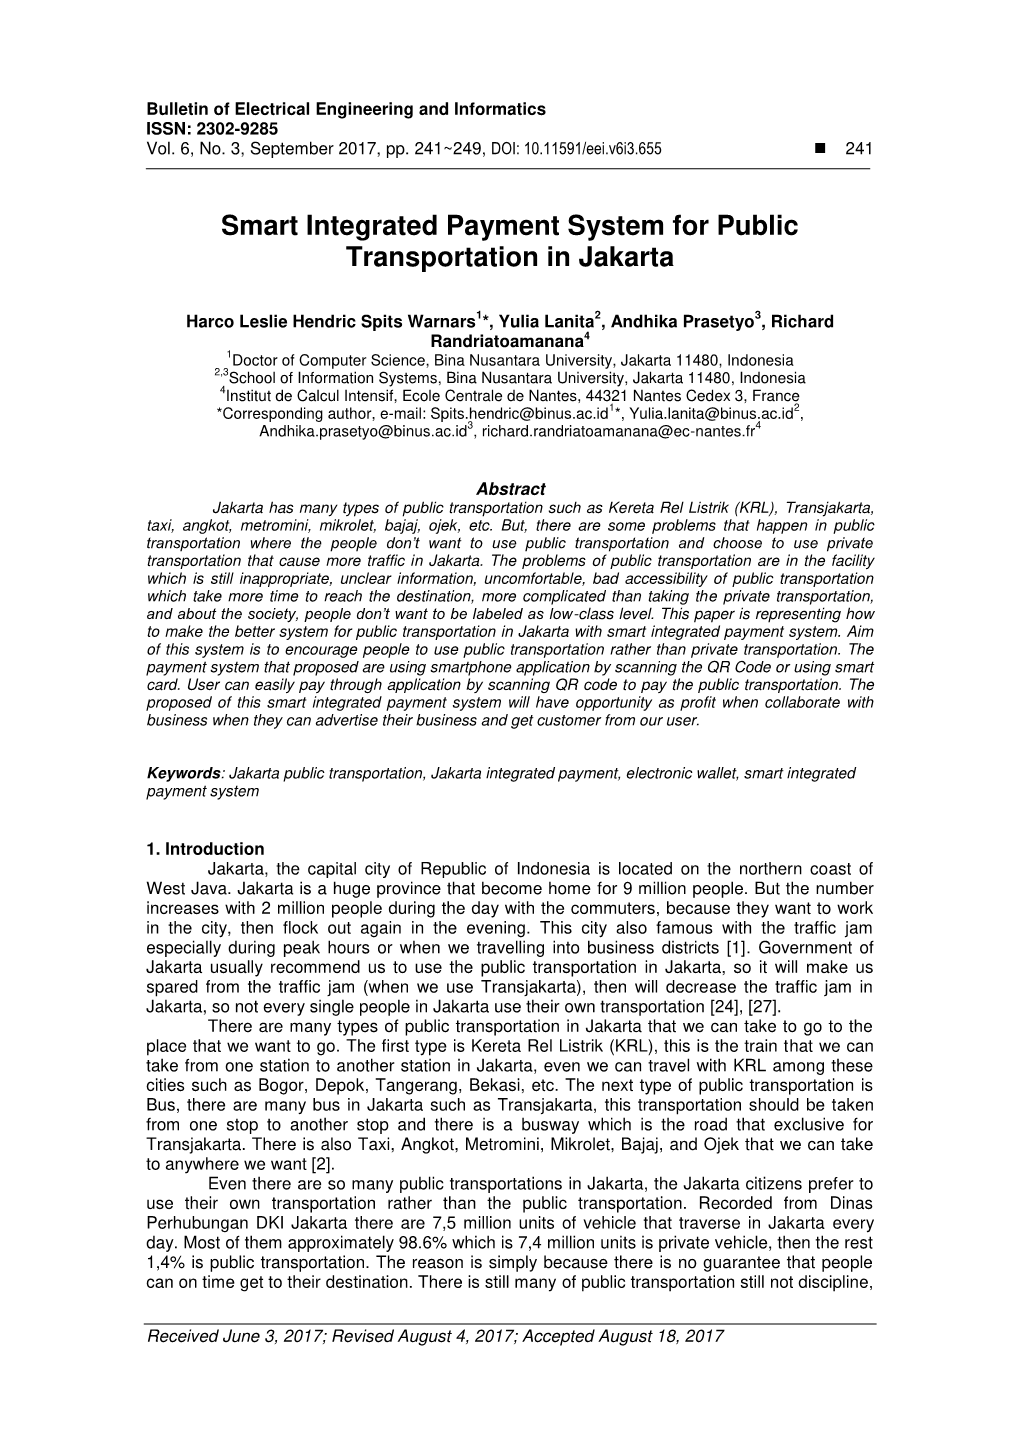 Smart Integrated Payment System for Public Transportation in Jakarta